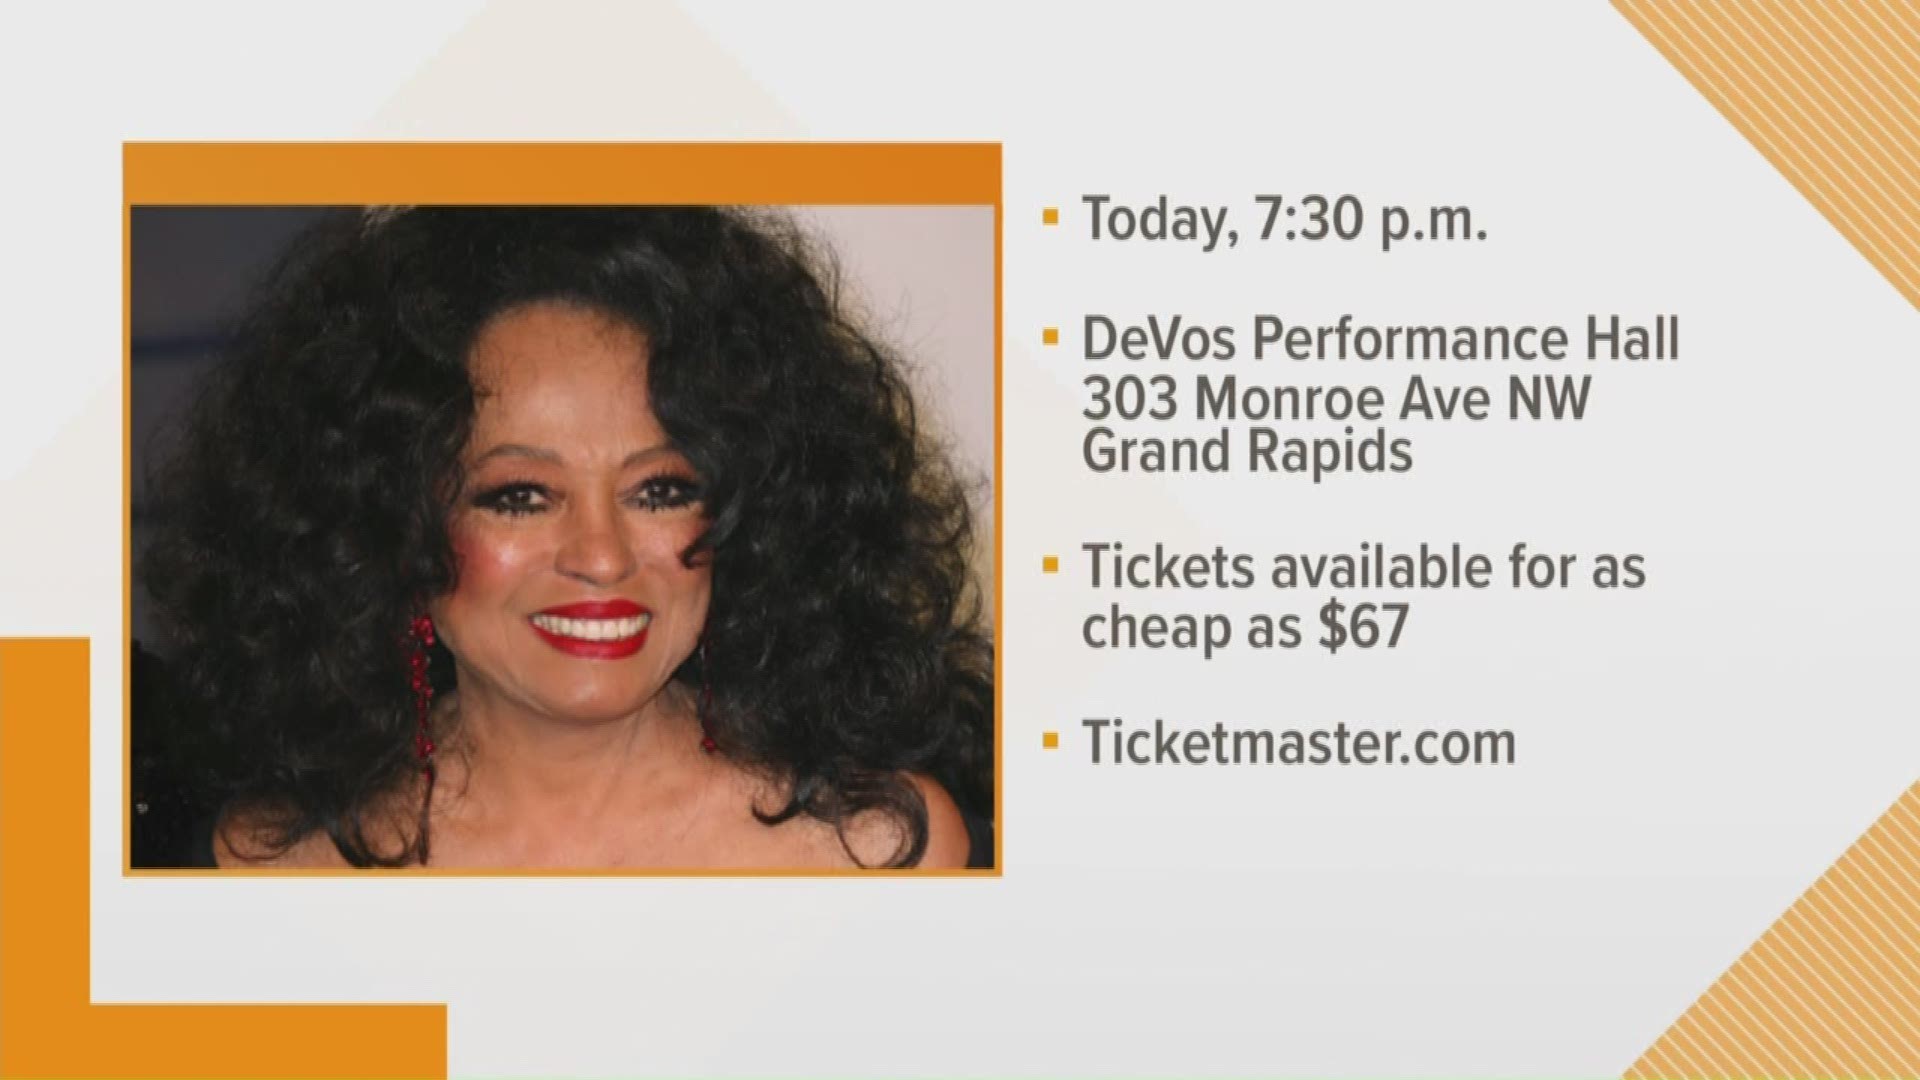 Motown living legend Diana Ross is in Grand Rapids, bringing her Diamond Diana Tour to the DeVos Performance Hall.